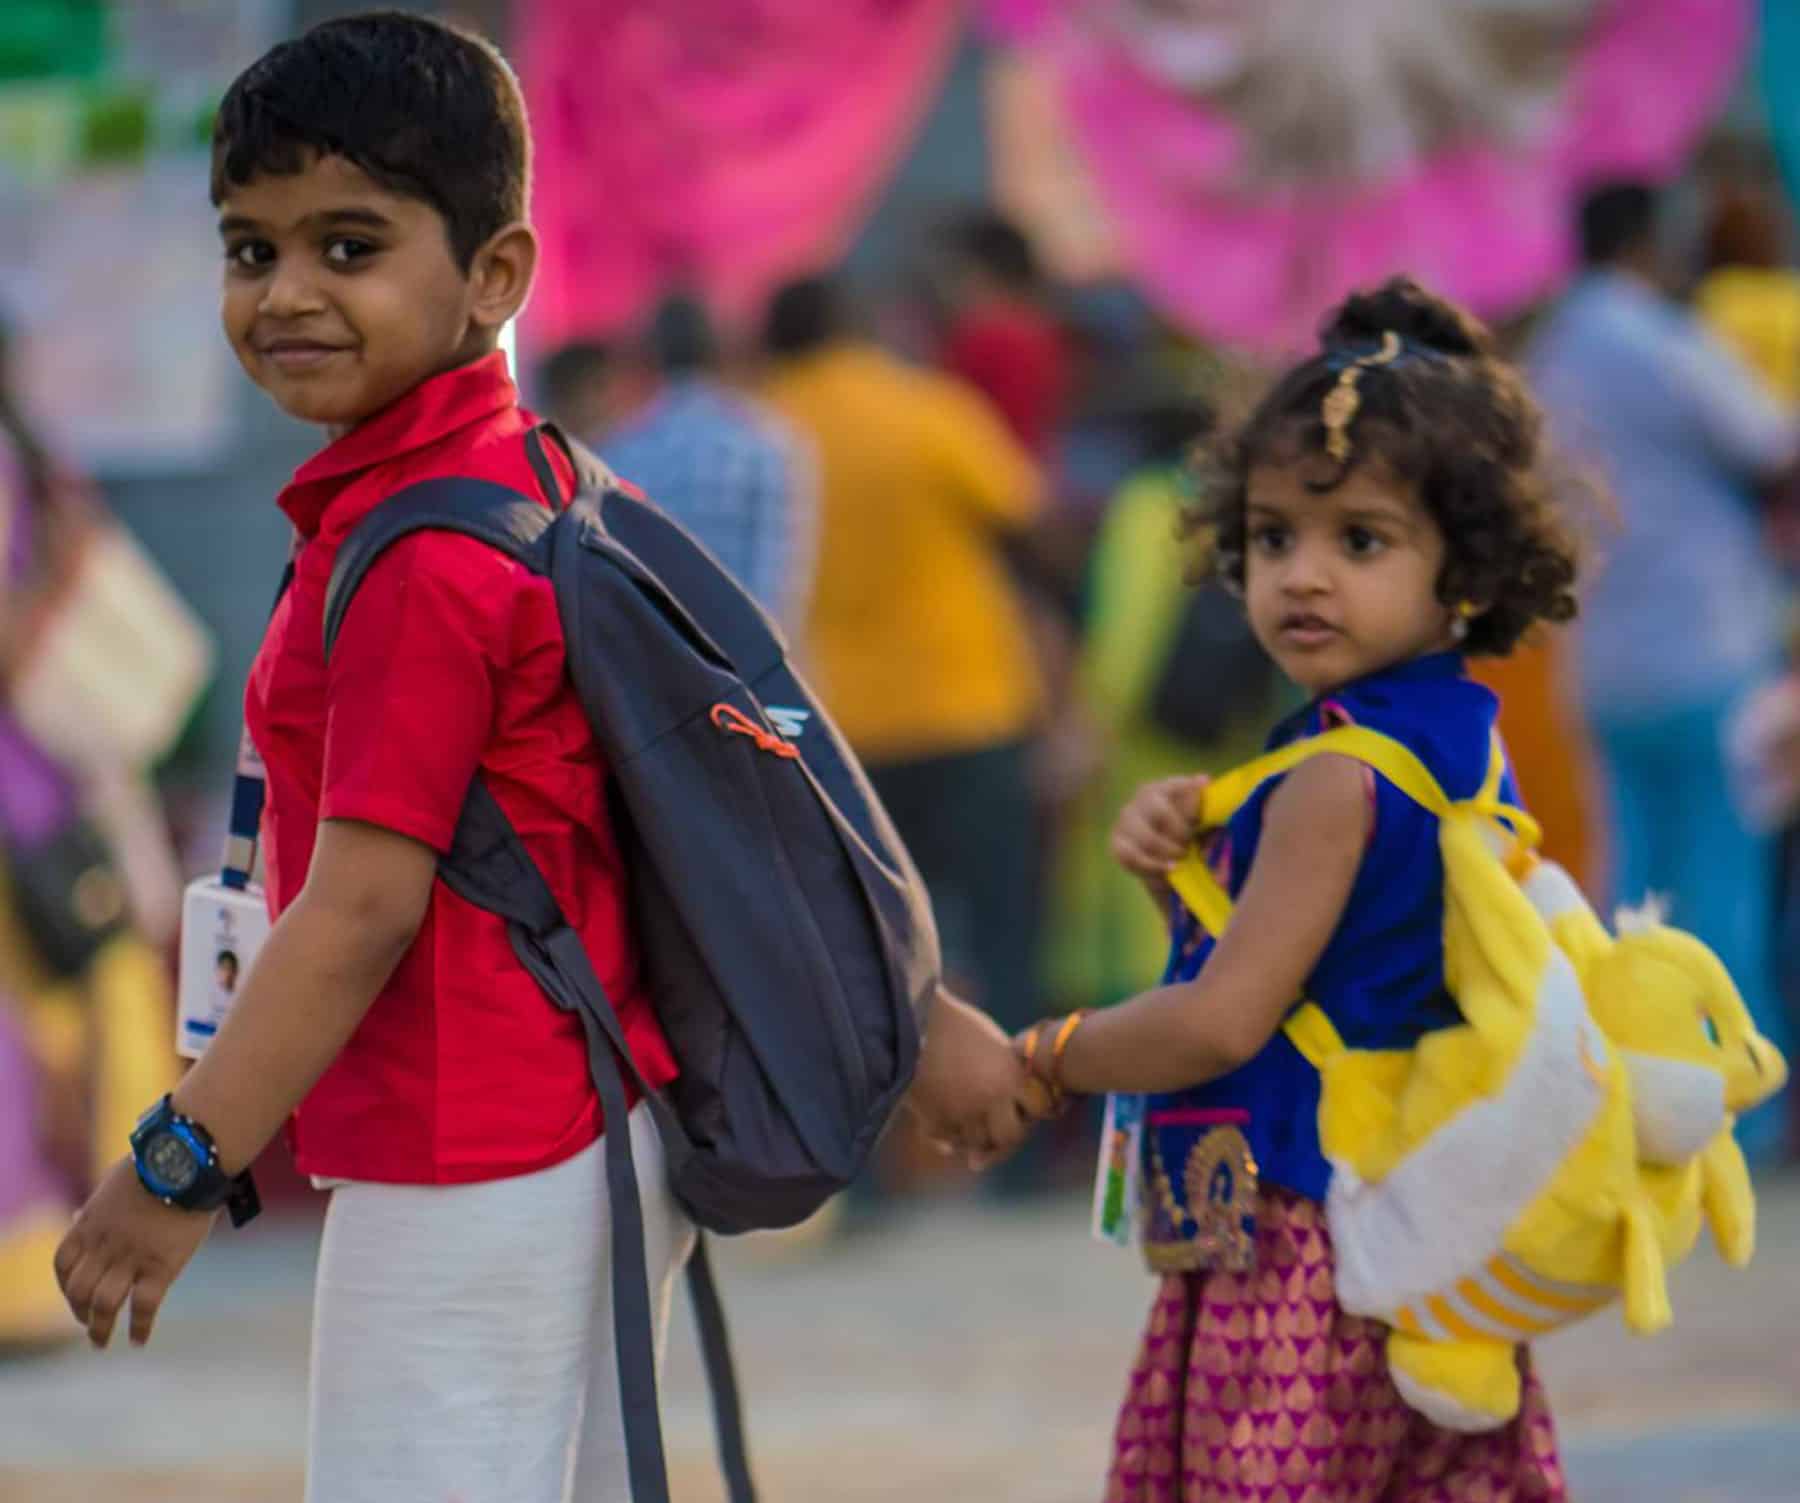 Two kids wearing traditional dresses joining their hands wearing school bags on their back on their way to school